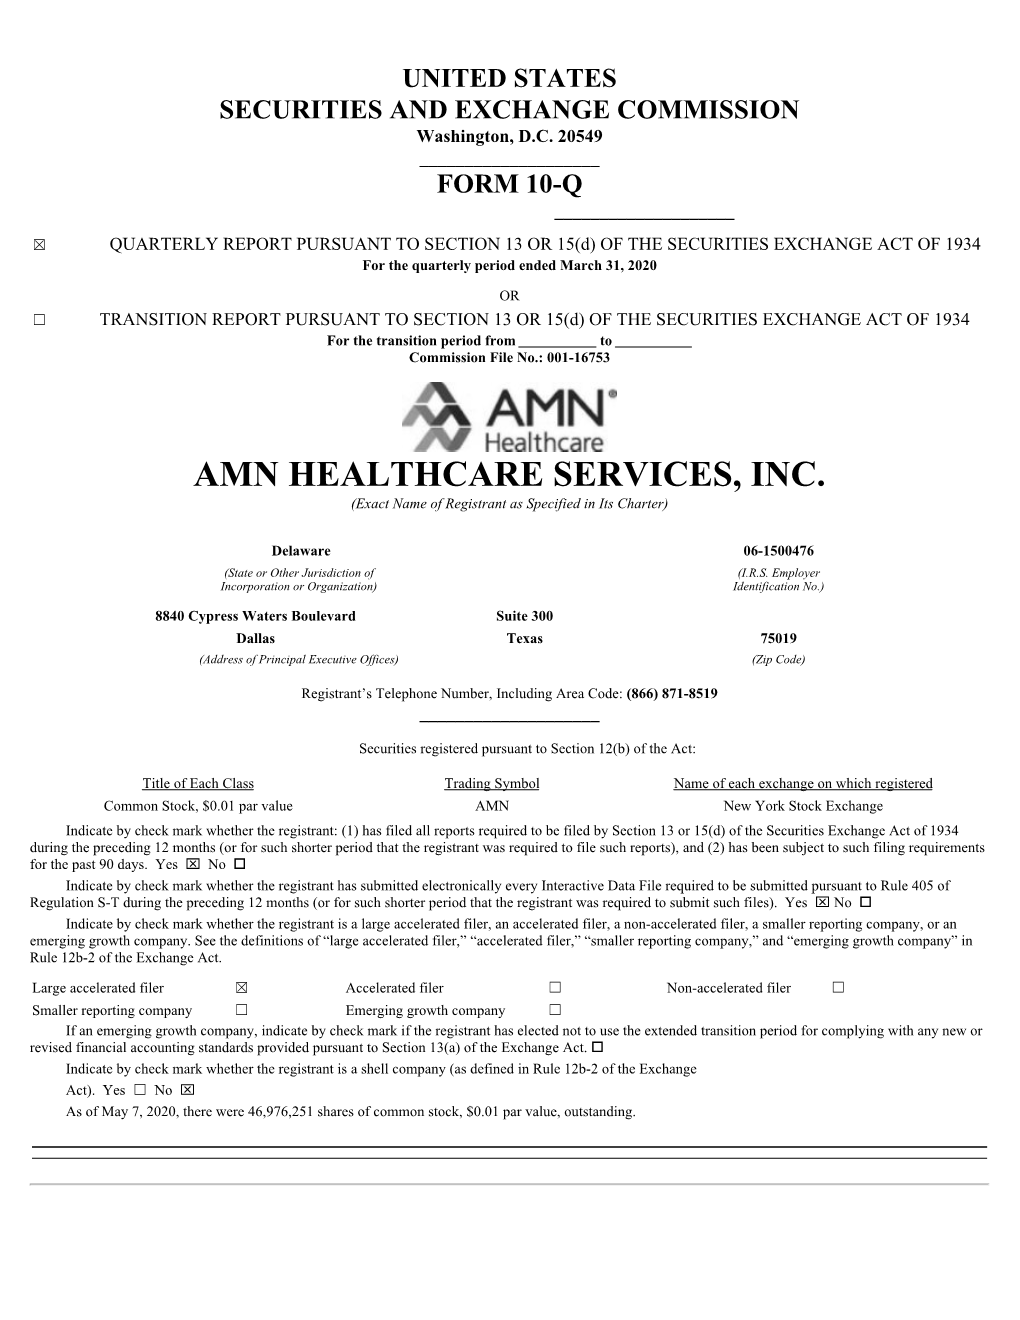 AMN HEALTHCARE SERVICES, INC. (Exact Name of Registrant As Specified in Its Charter)